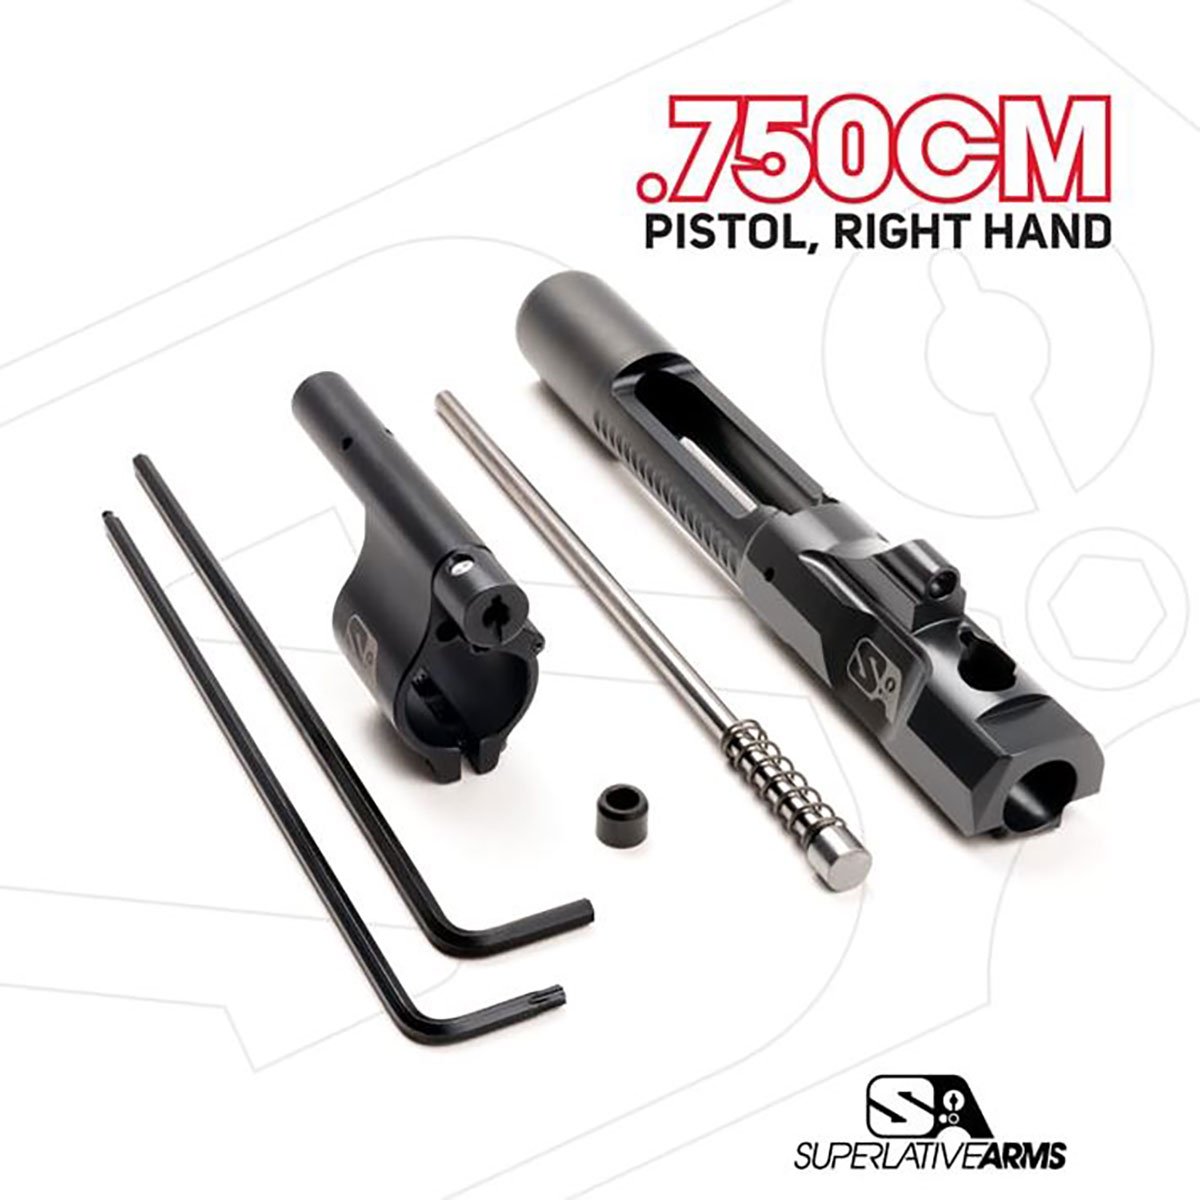 SUPERLATIVE ARMS LLC - AR-15 ADJUSTABLE PISTON SYSTEM WITH CLAMP ON 0.750" GAS BLOCK